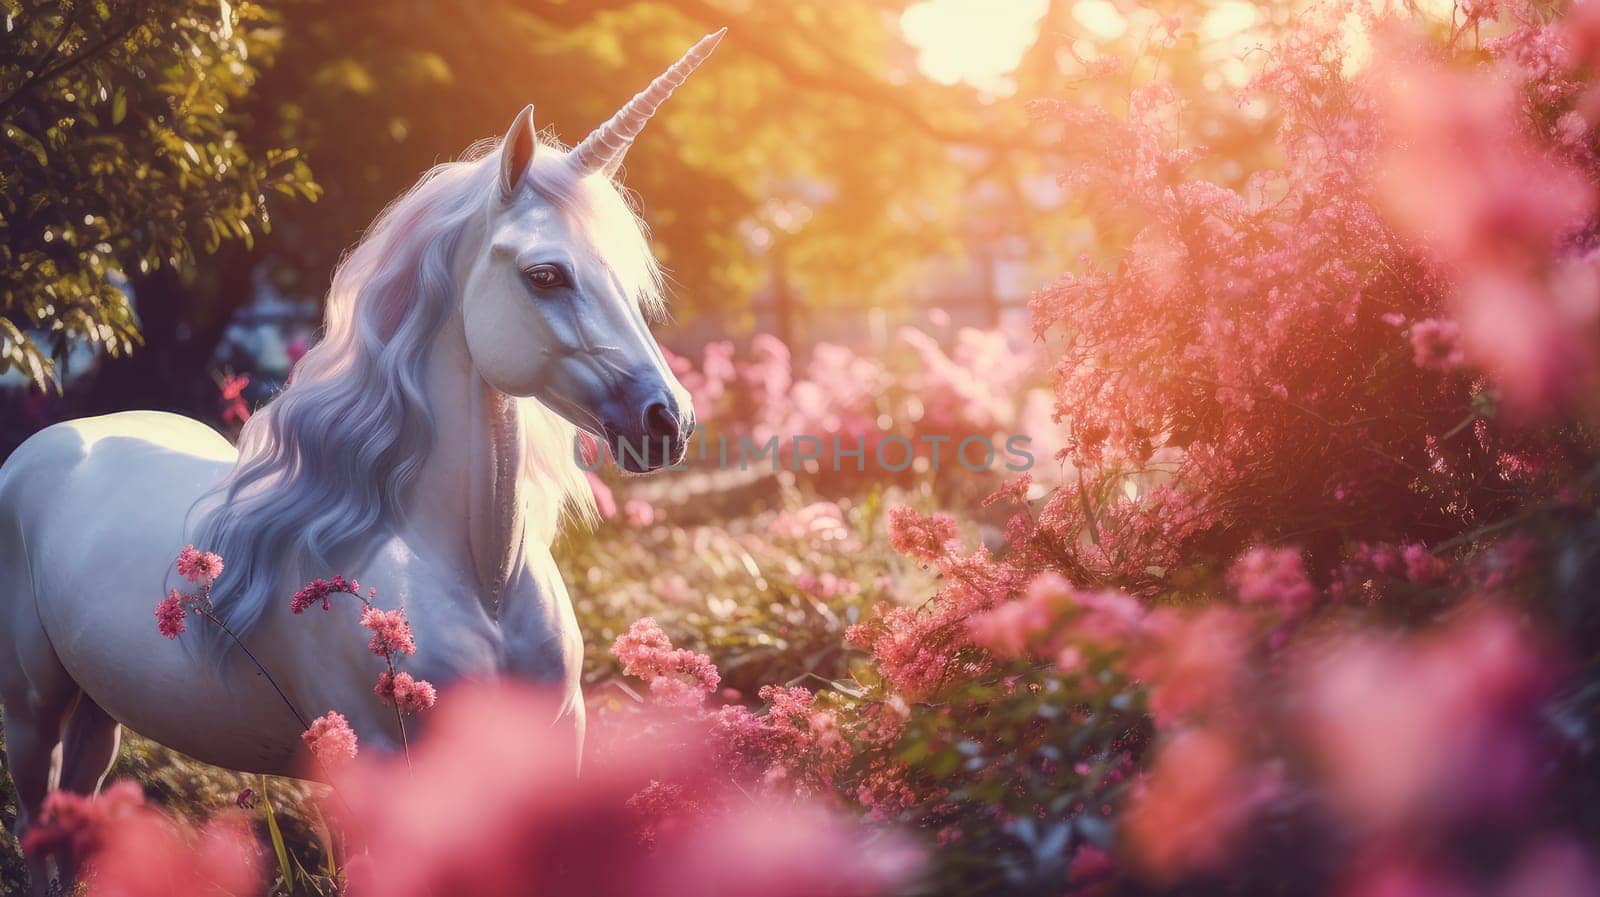 Fairytale unicorn in a field with flowers in pink. by Alla_Yurtayeva